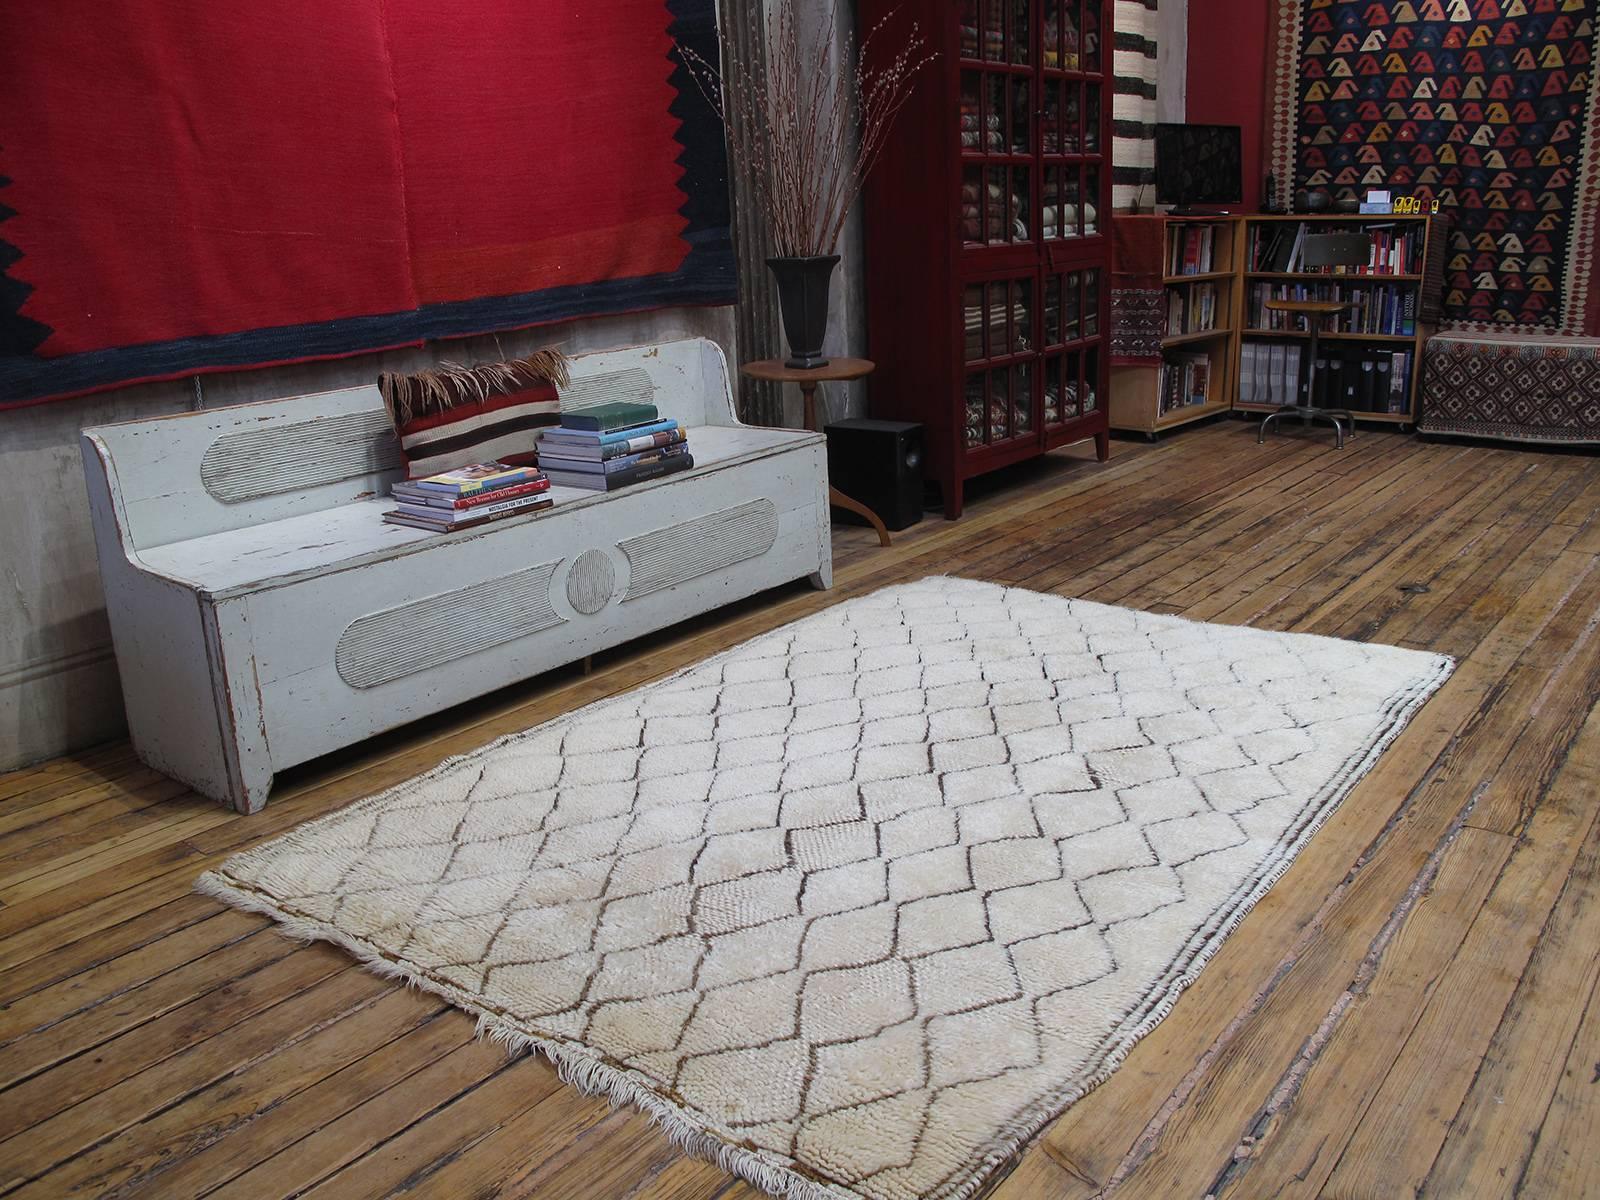 A beautiful Moroccan Berber rug by the Beni Ouarain tribes of the Middle Atlas Mountains, in rare small format with excellent quality wool and milky color. Gently worn in places, it is still quite sturdy and clean.